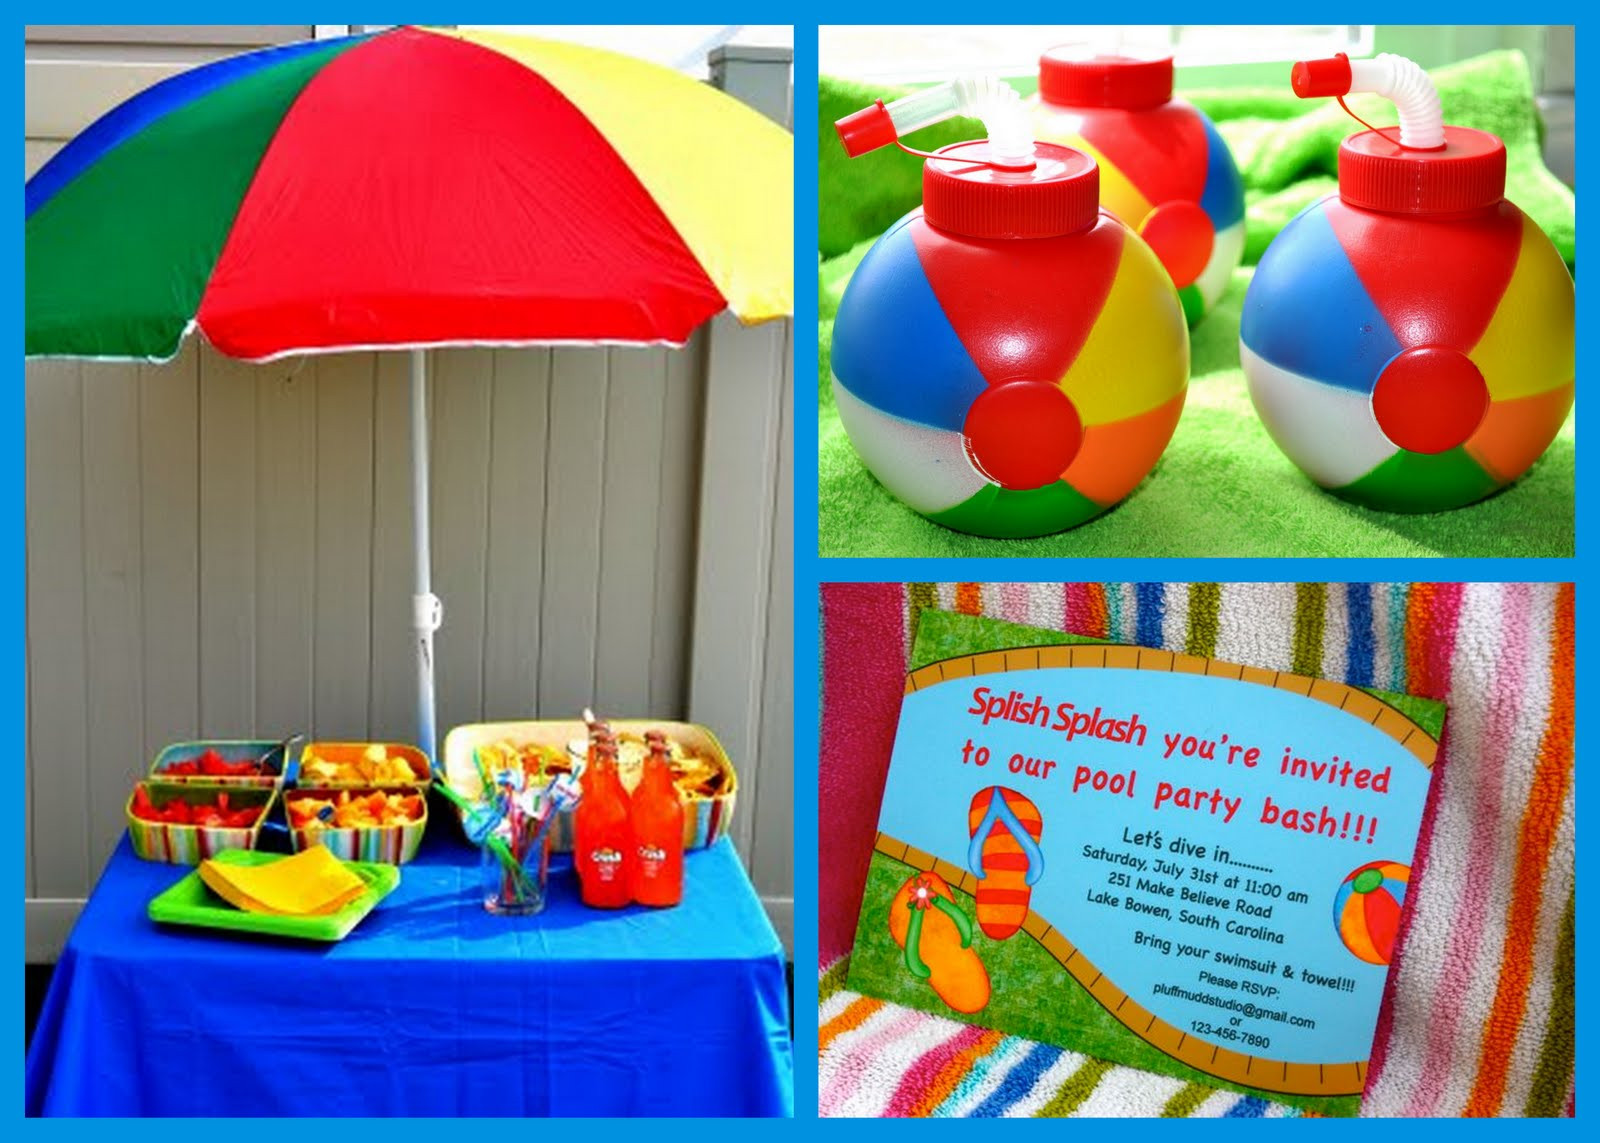 Poolside Party Decoration Ideas
 Pluff Mudd Studio Pool Party